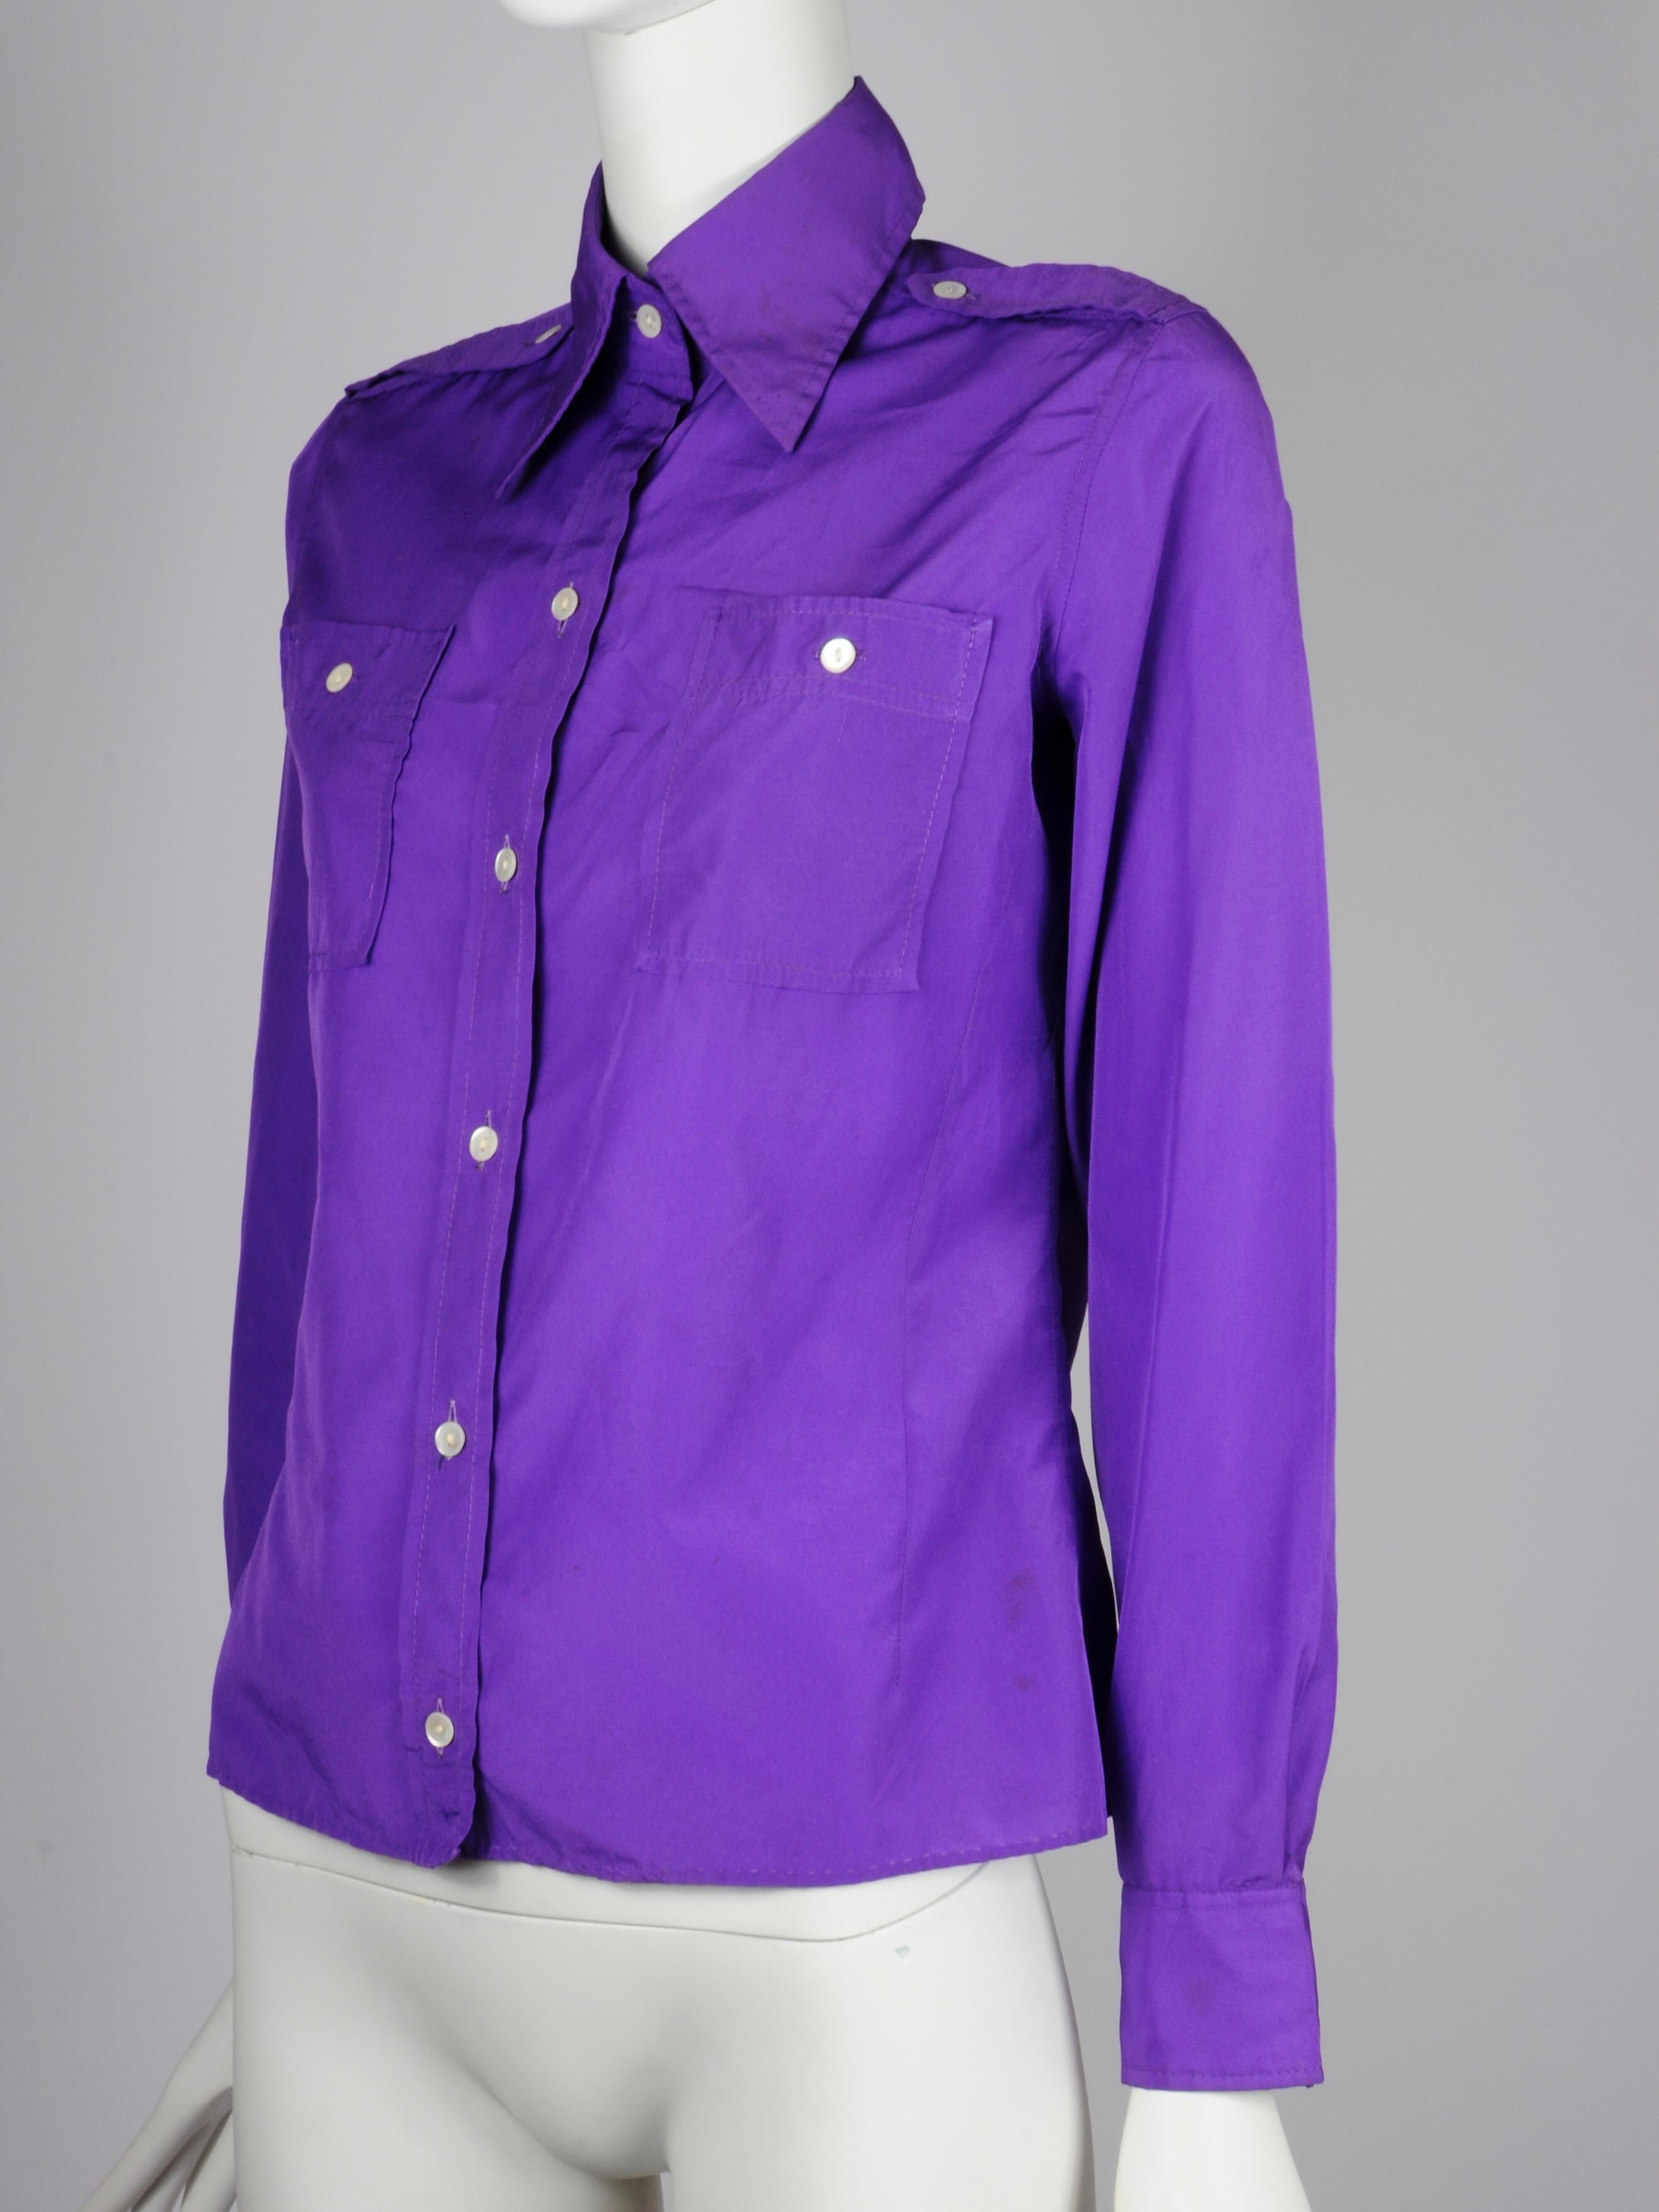 Ted Lapidus 1970s purple blouse with military / uniform style shoulder details and pockets. The blouse has a typical 1970s collar and beautful bright purple hue. 

BRAND DESCRIPTION
Ted Lapidus started his fashion house in Paris in 1951 doing both